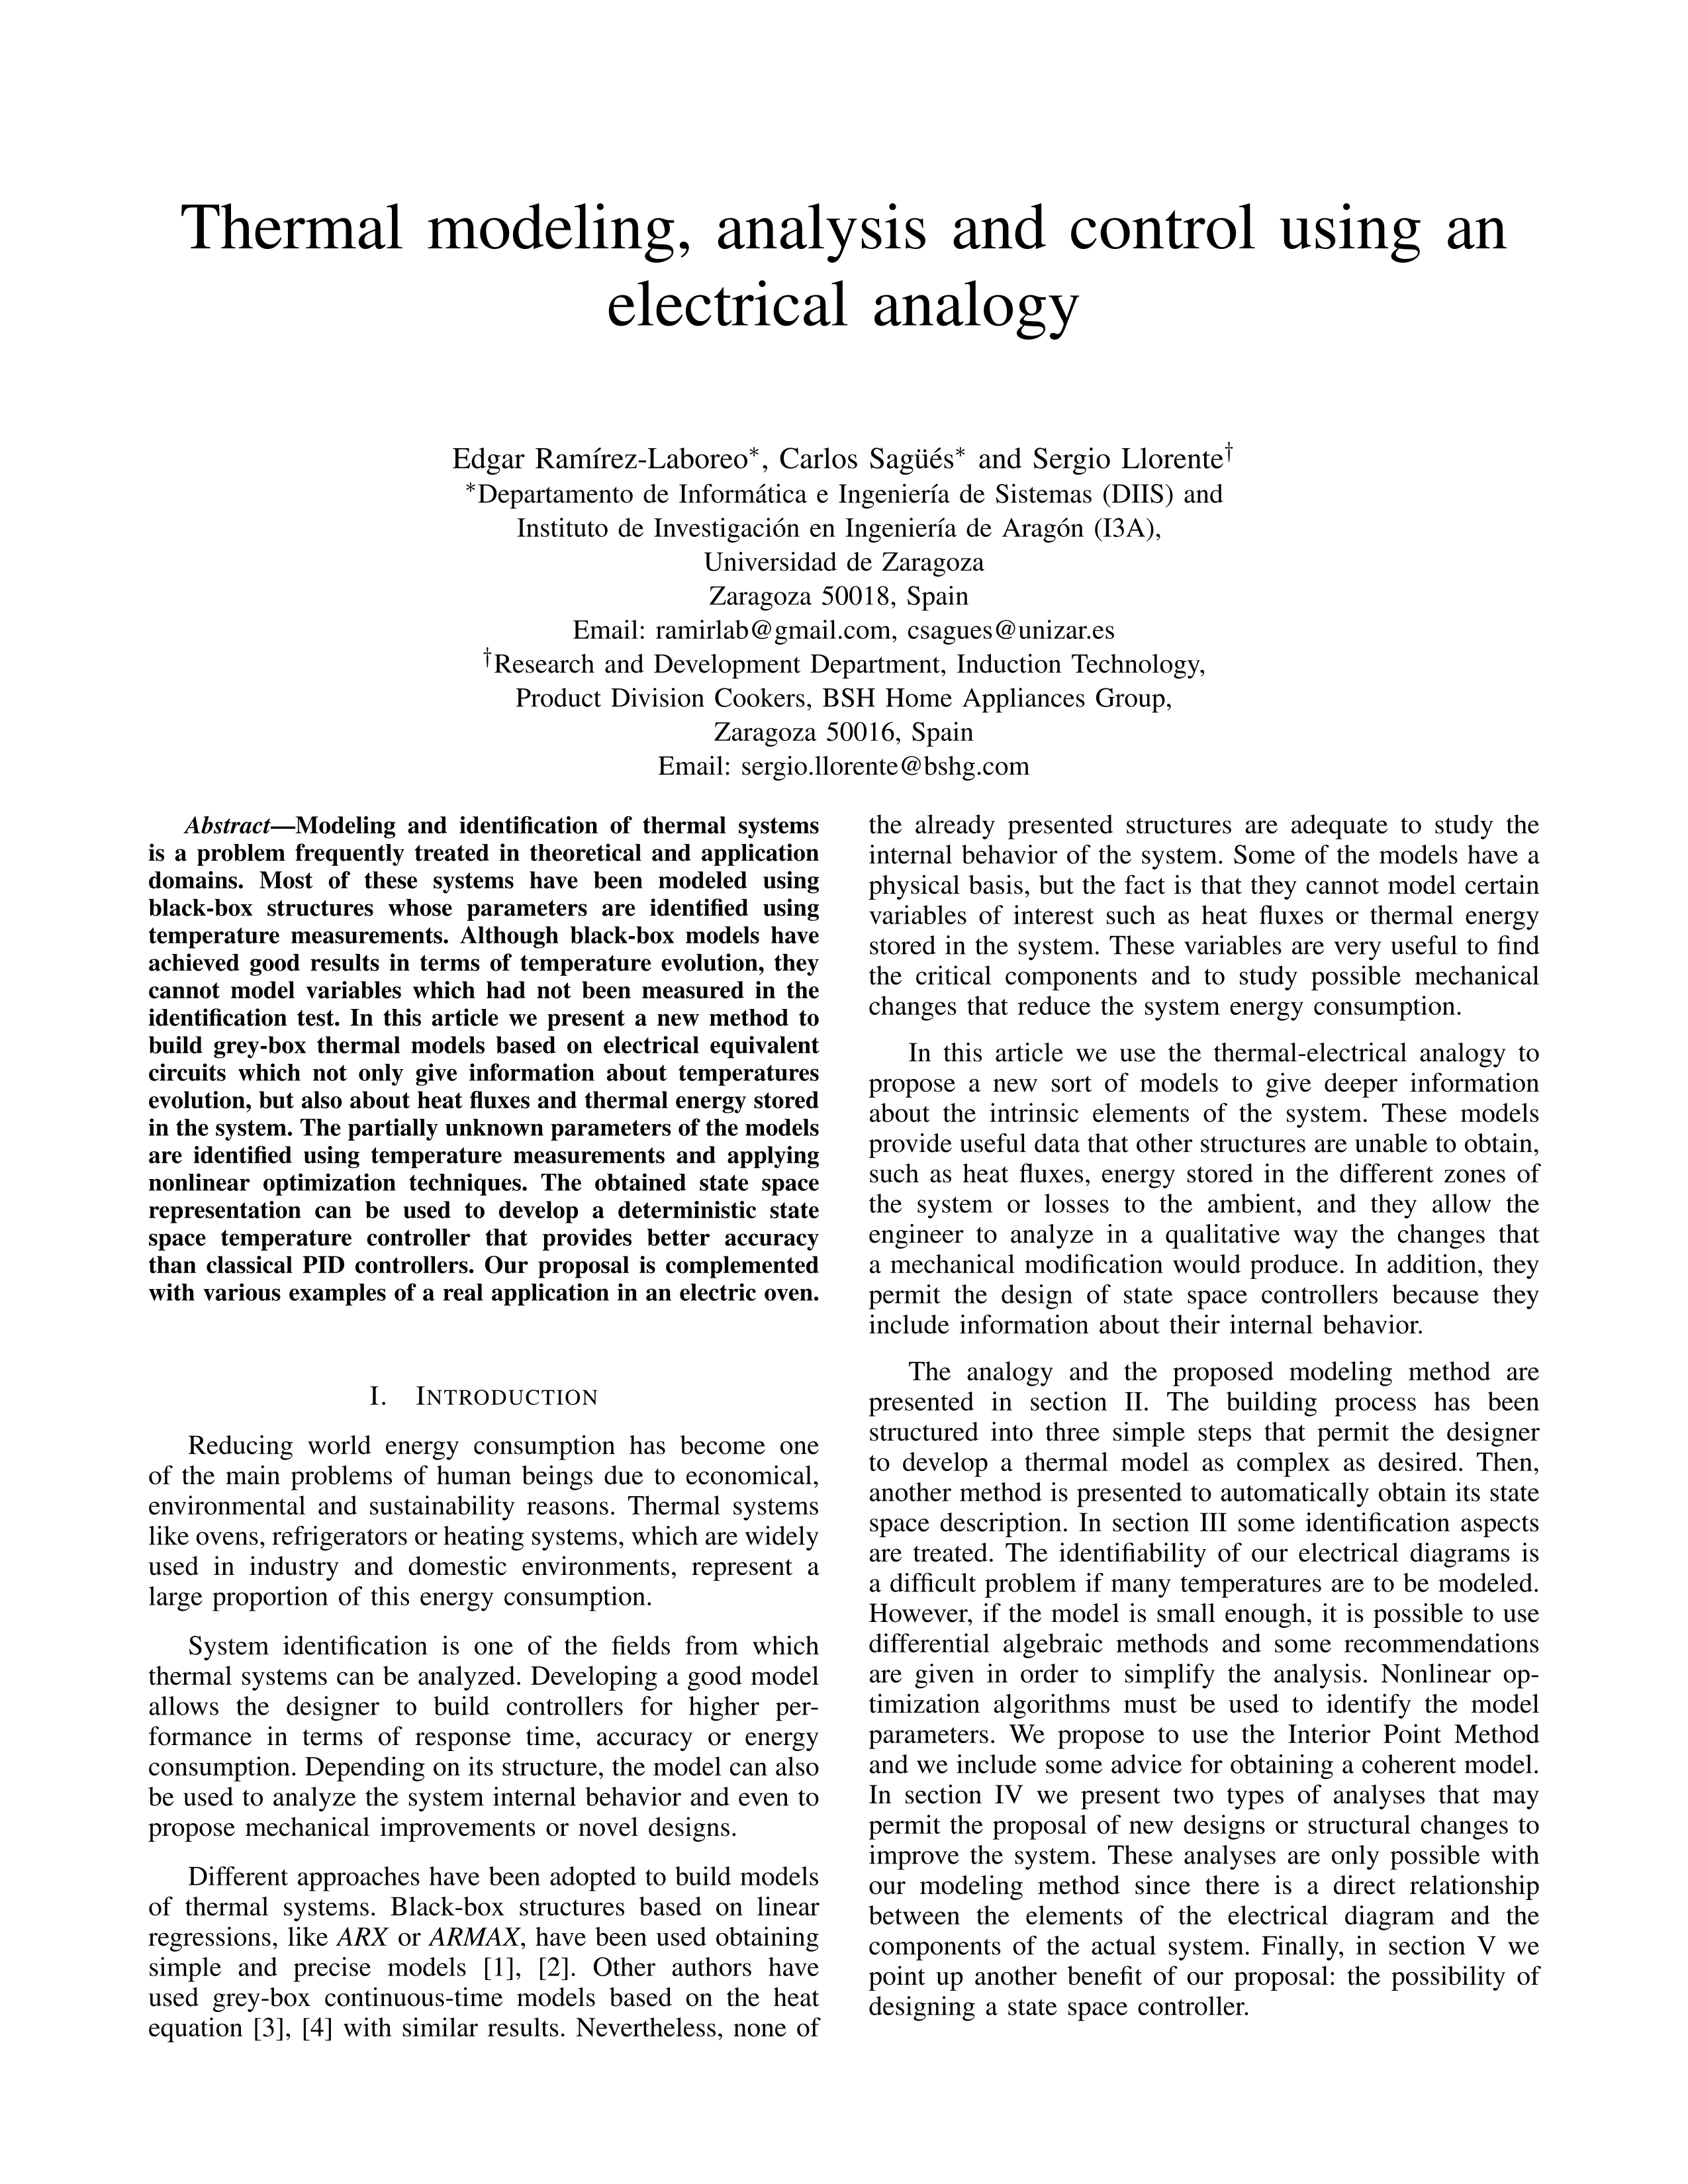 Thermal modeling, analysis and control using an electrical analogy